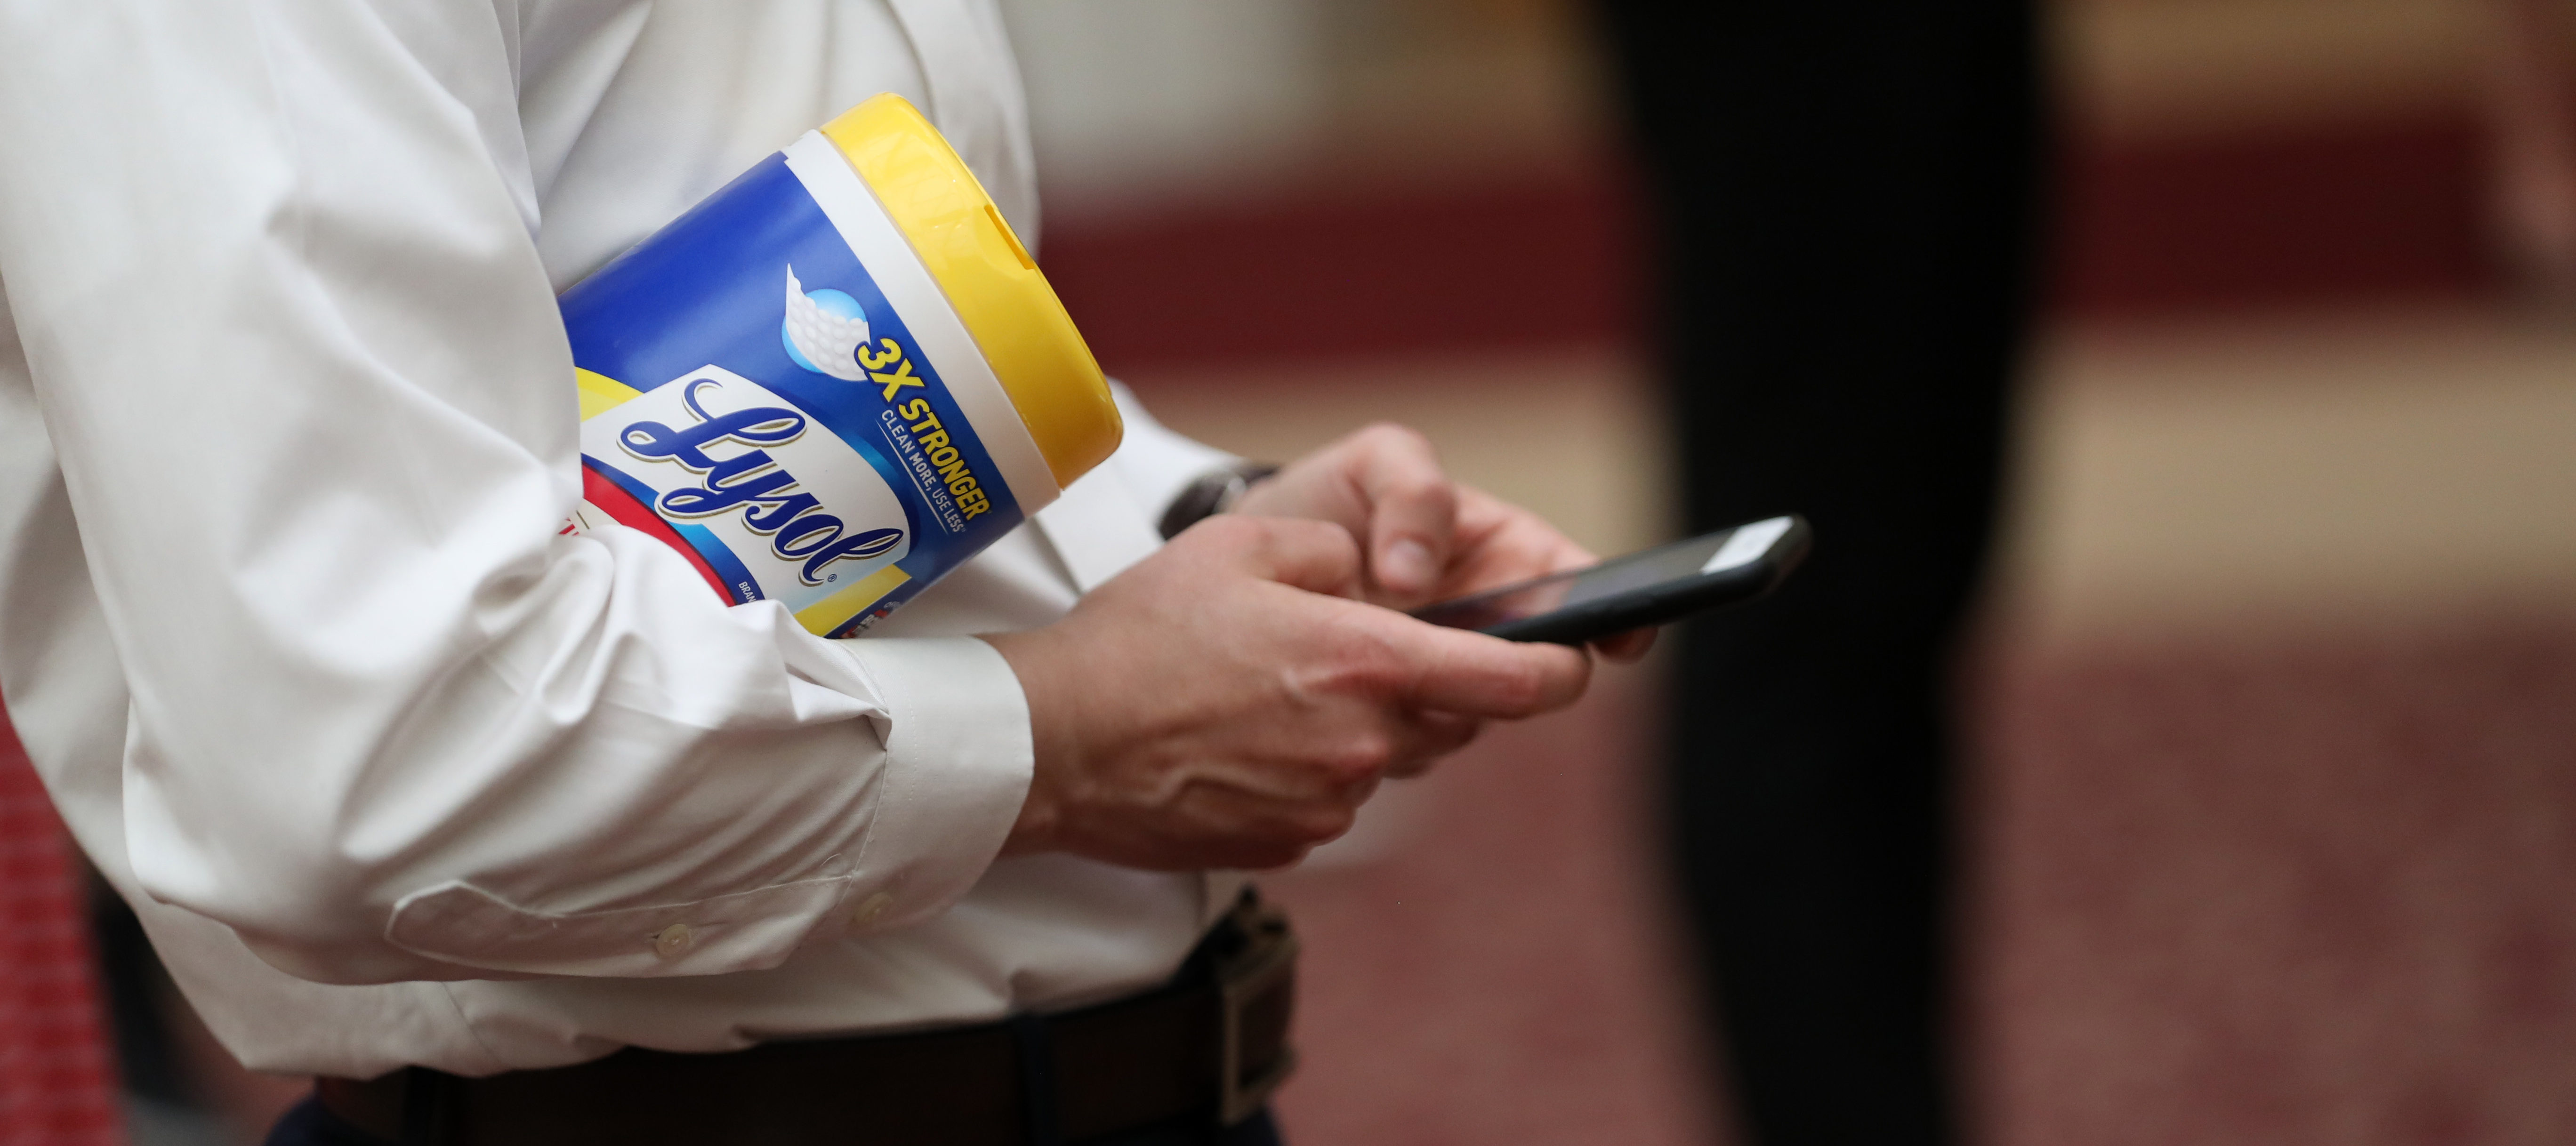 An attendee holds a container of Lysol disinfecting wipes as San Francisco Mayor London Breed (R) speaks during a press conference at San Francisco City Hall on March 16, 2020 in San Francisco, California. (Photo by Justin Sullivan/Getty Images)